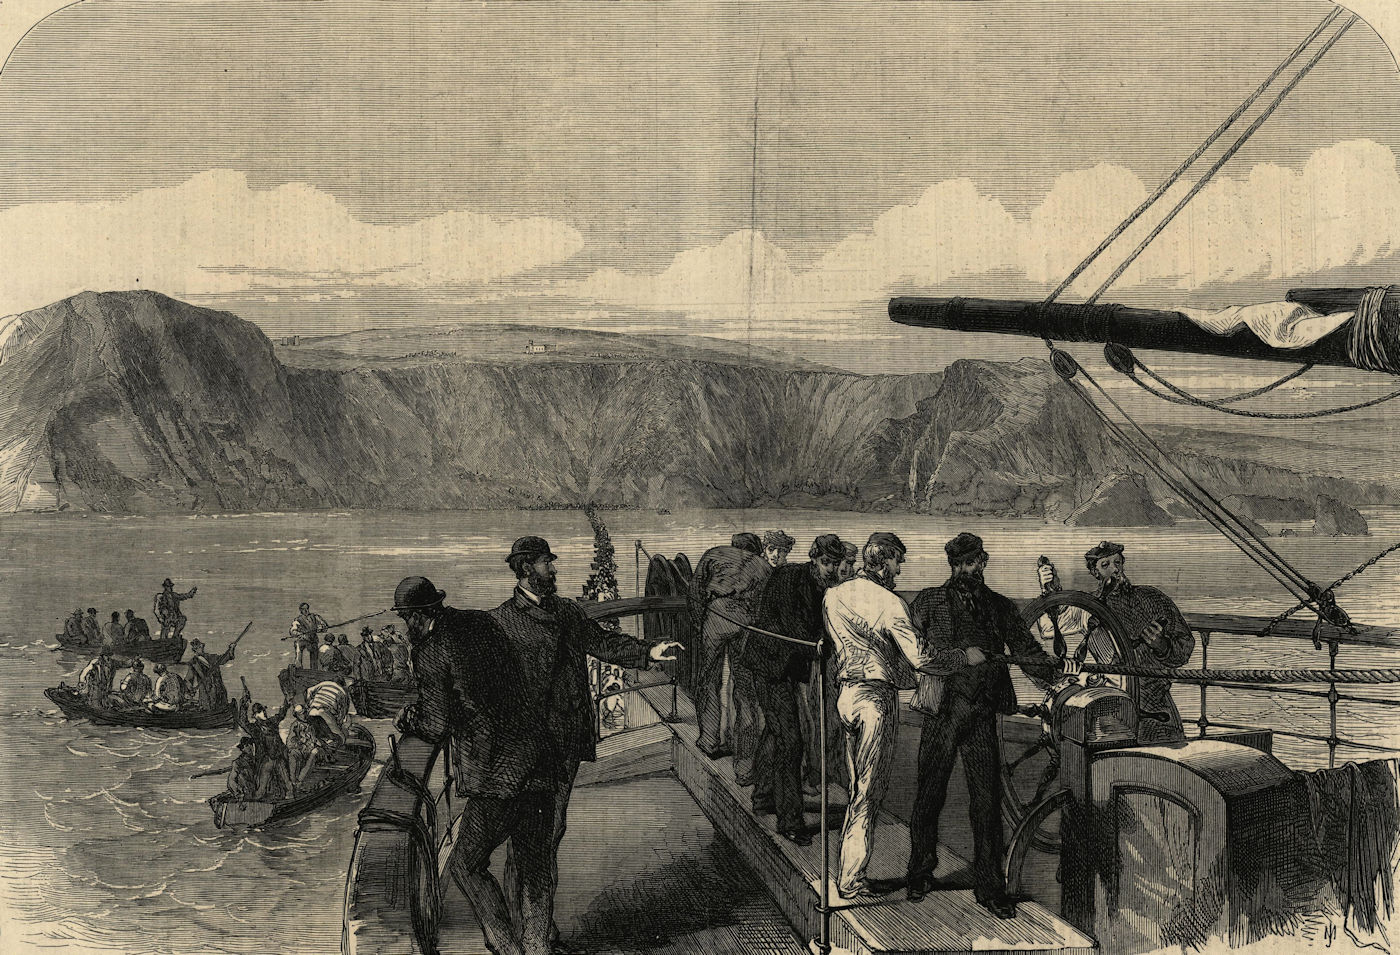 Laying the Atlantic Telegraph Cable, Foilhommerum, Valentia island. Ireland 1866